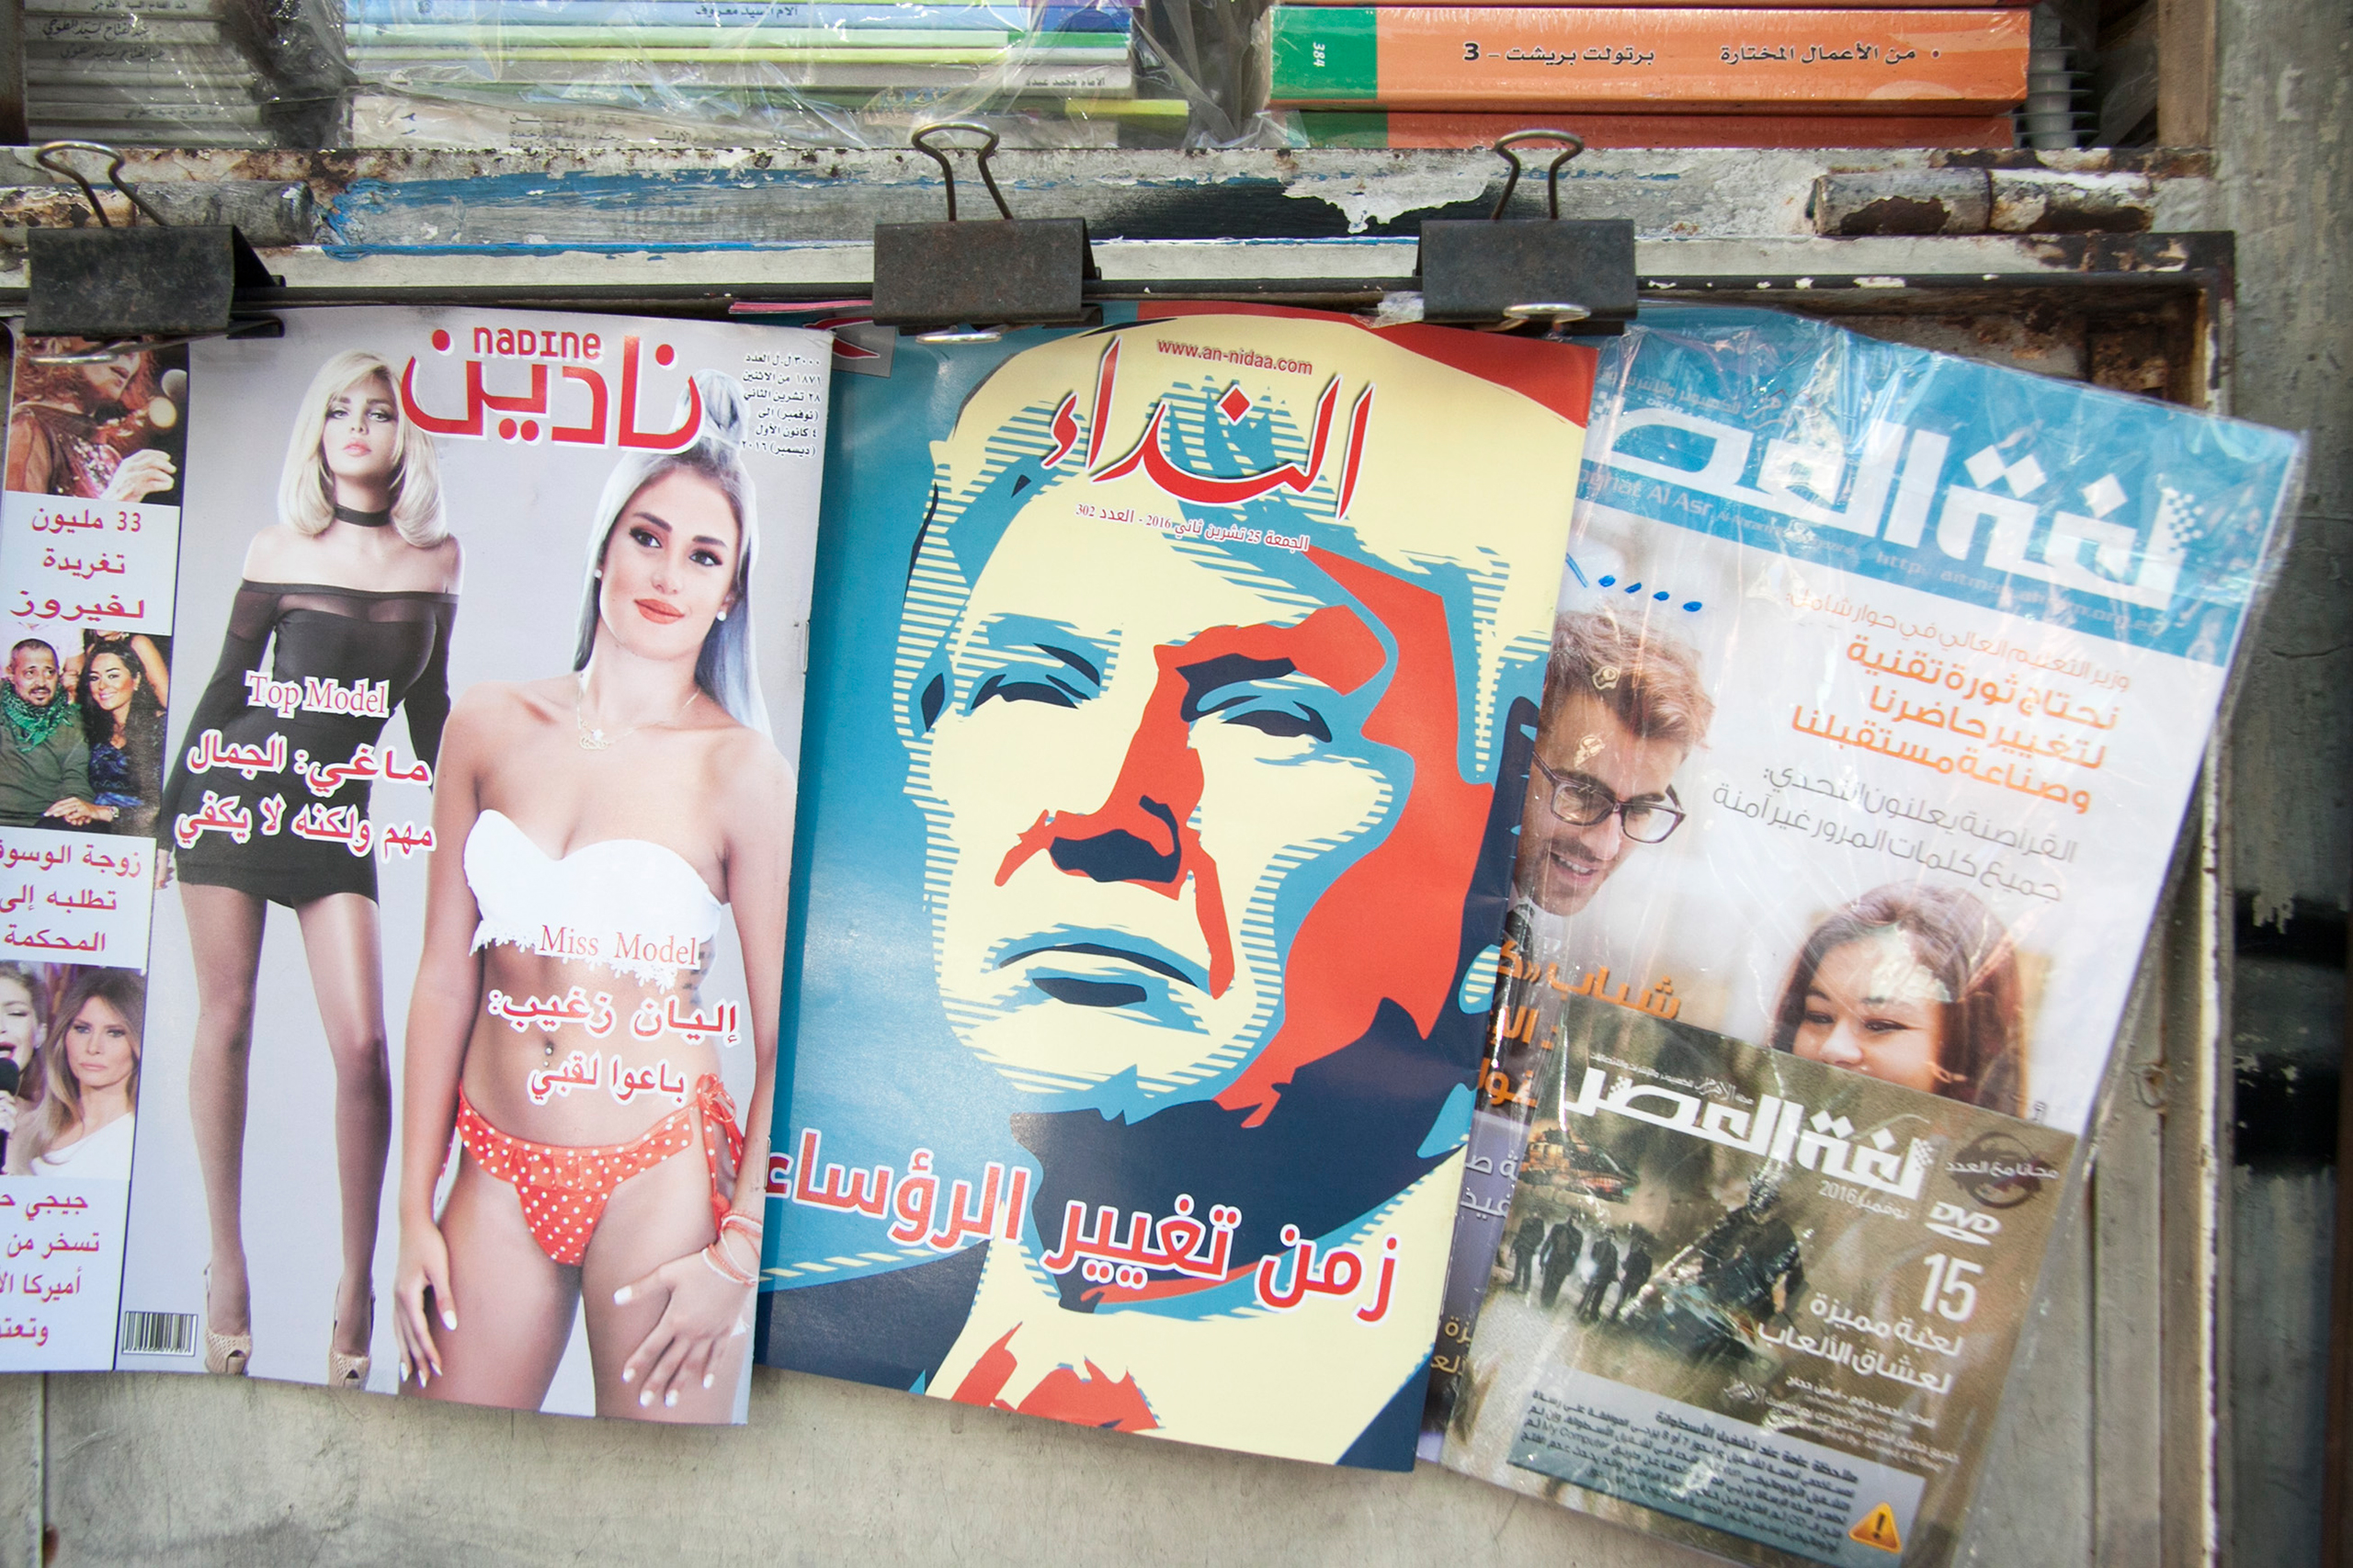 President-elect Donald Trump is featured on the front cover of an Arabic-language magazine cover at a newsstand in Beirut on Nov. 25, 2016. (Amer Ghazzal—Barcroft Media/Getty Images)